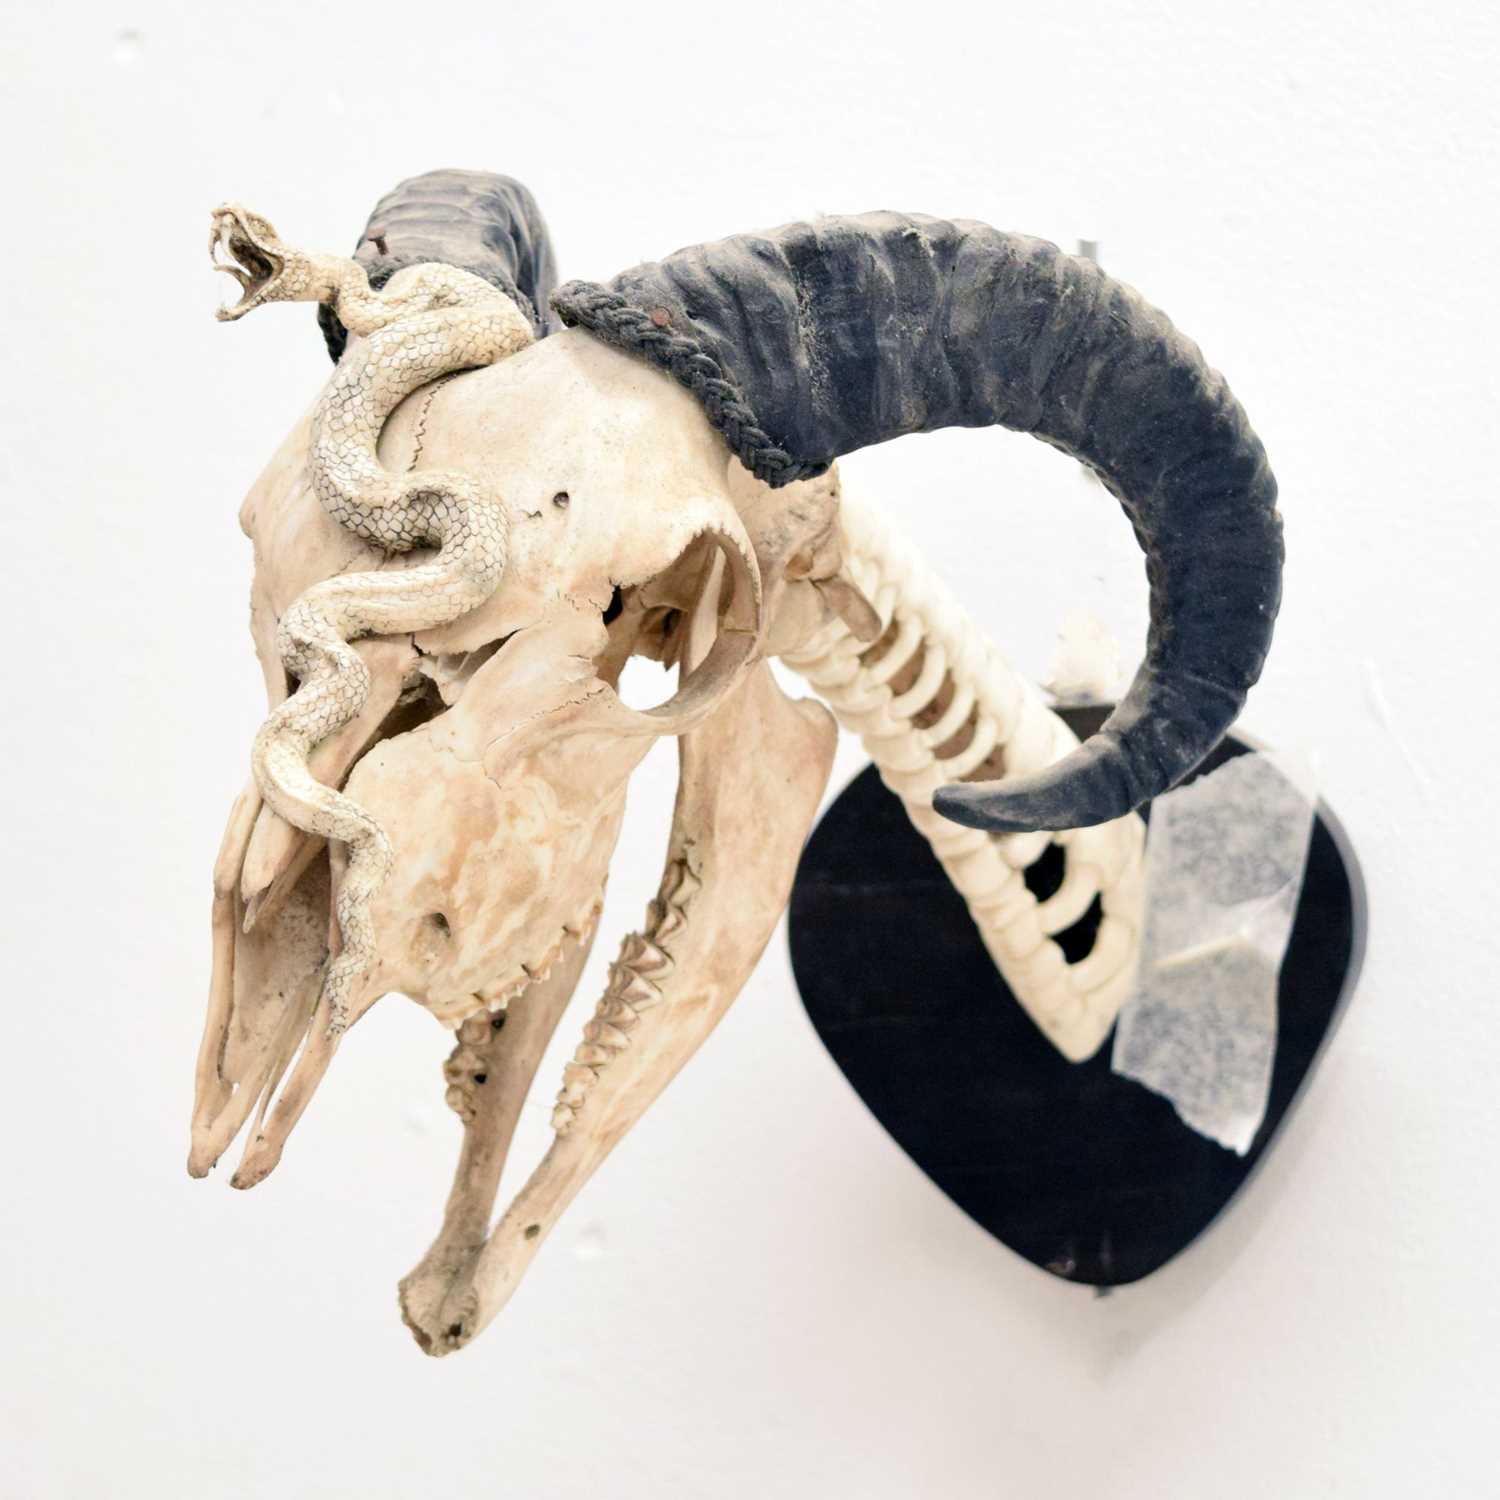 Mounted ram's head skull with snake